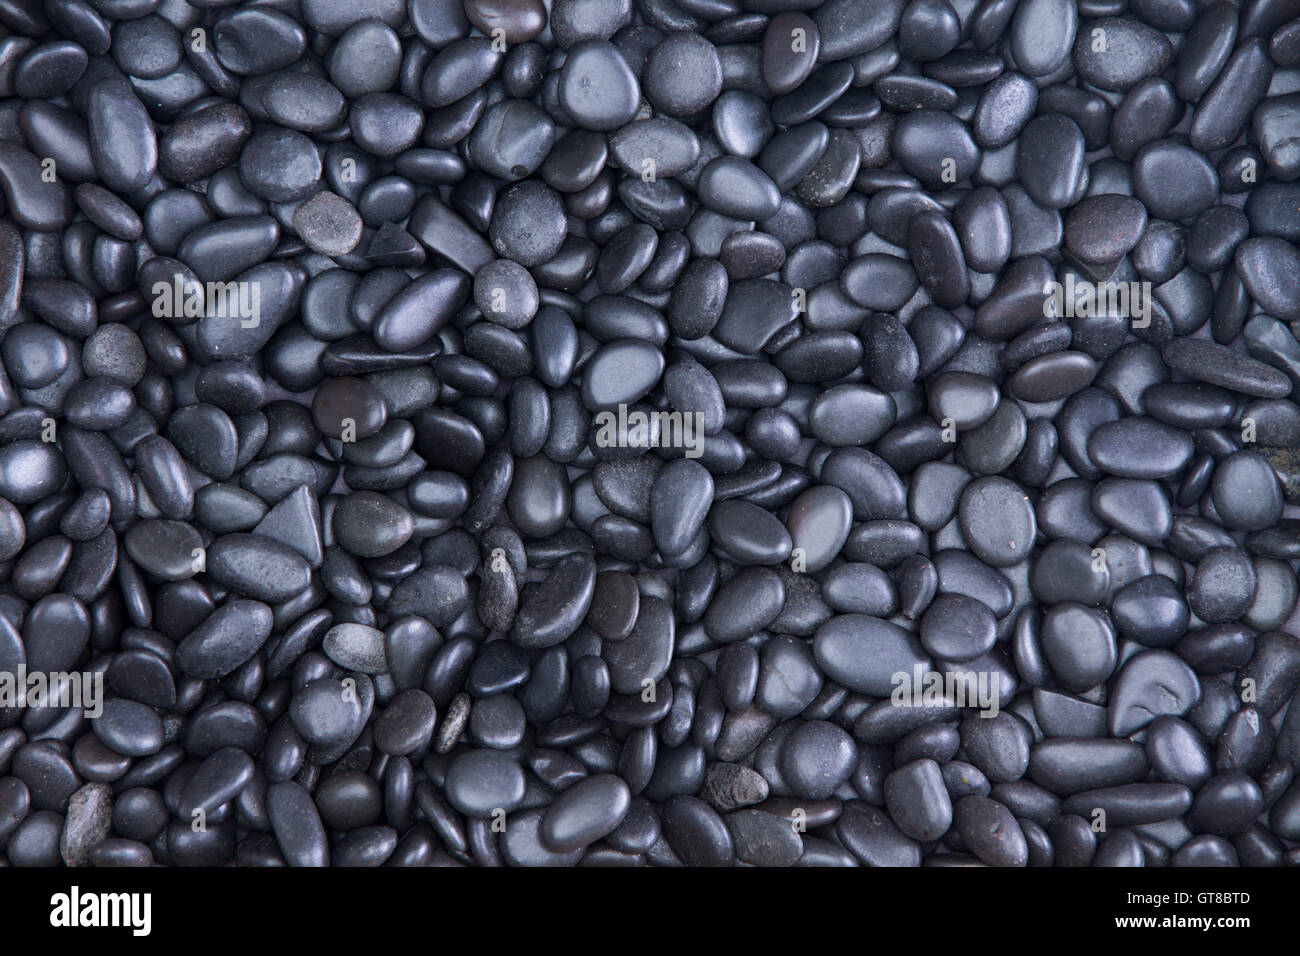 Background texture of small smooth waterworn black pebbles or stones for use in decor and garden landscaping, full frame close u Stock Photo